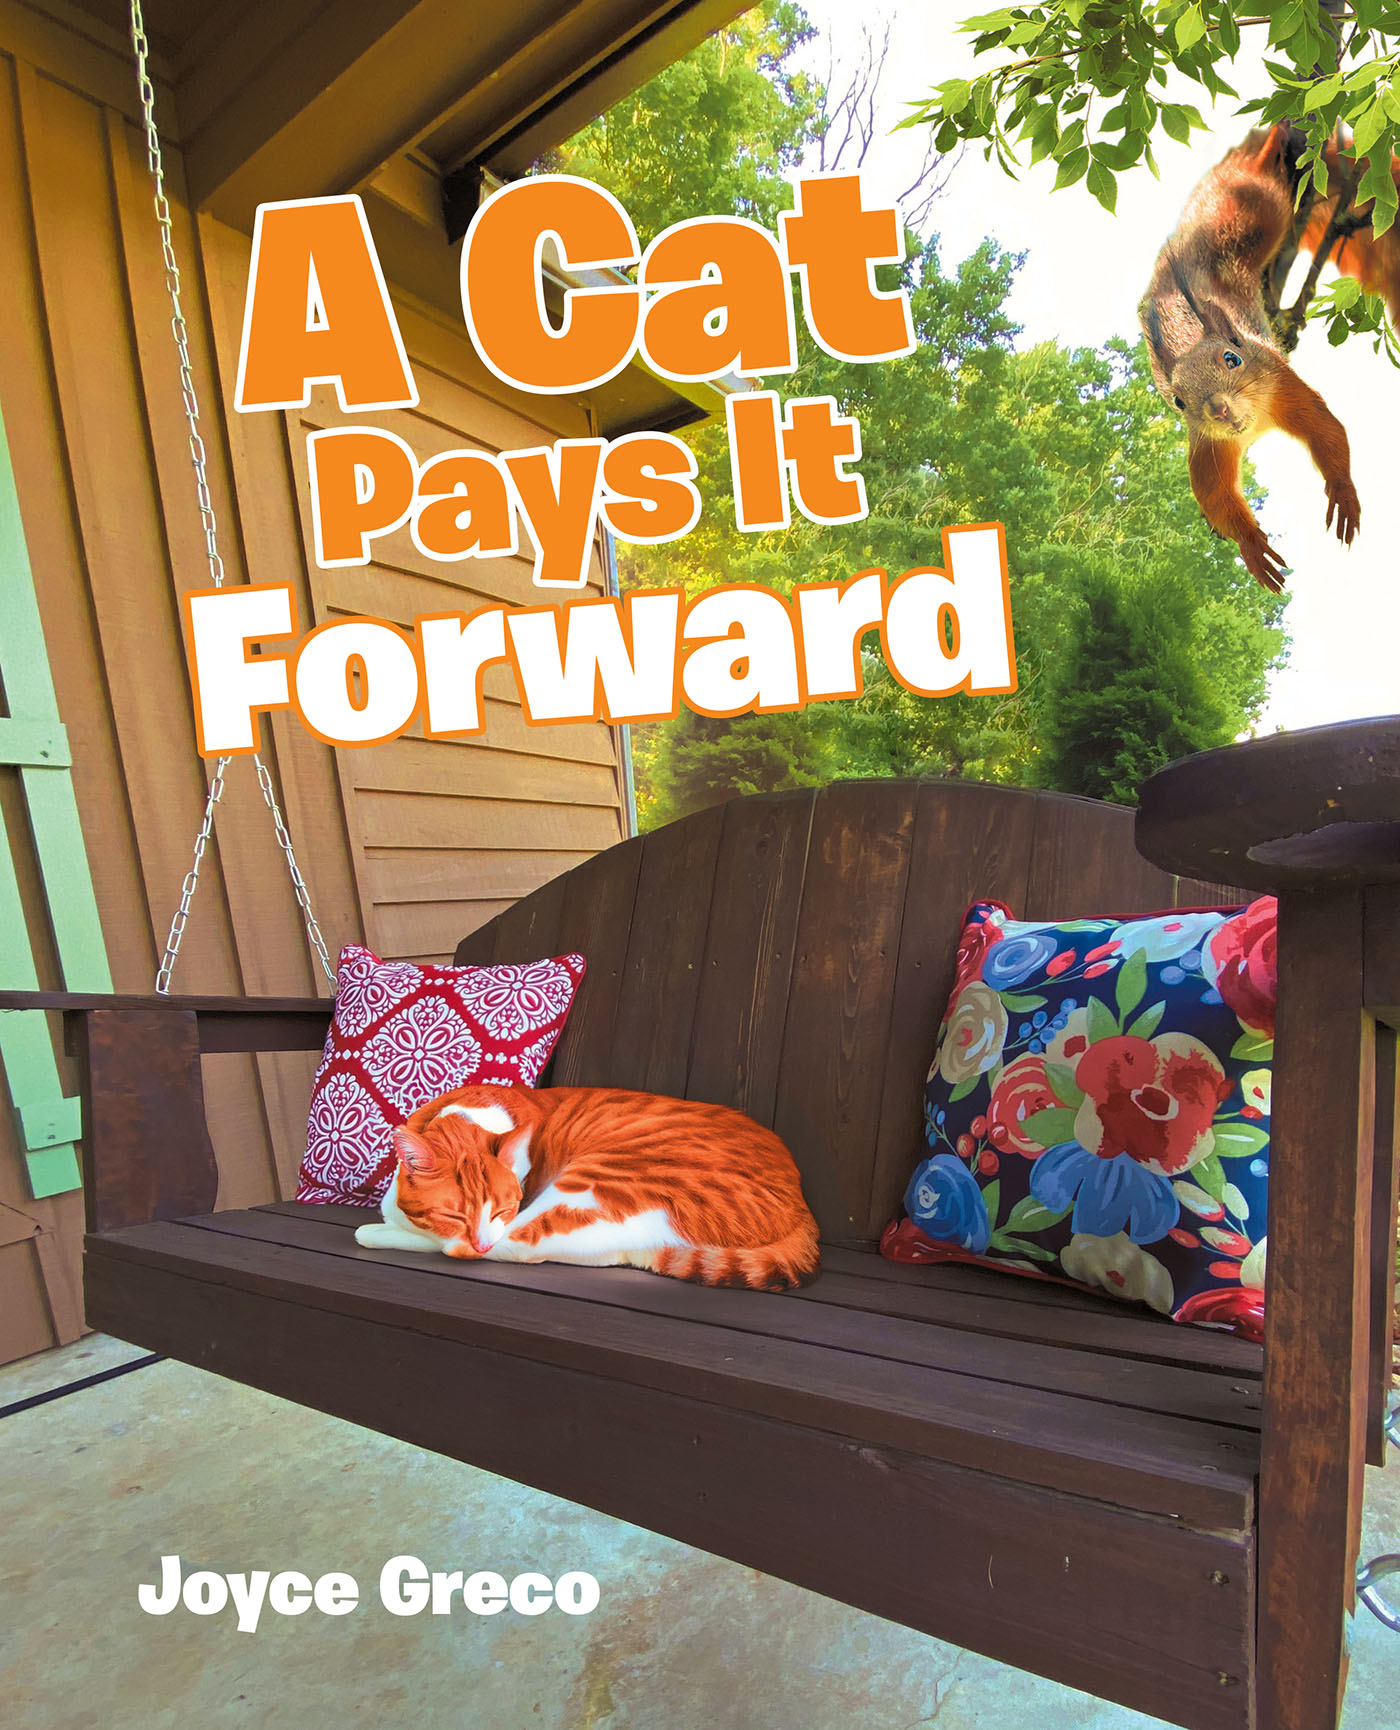 Joyce Greco’s Newly Released "A Cat Pays It Forward" is a Charming Tale of Friendship and Unexpected Connections